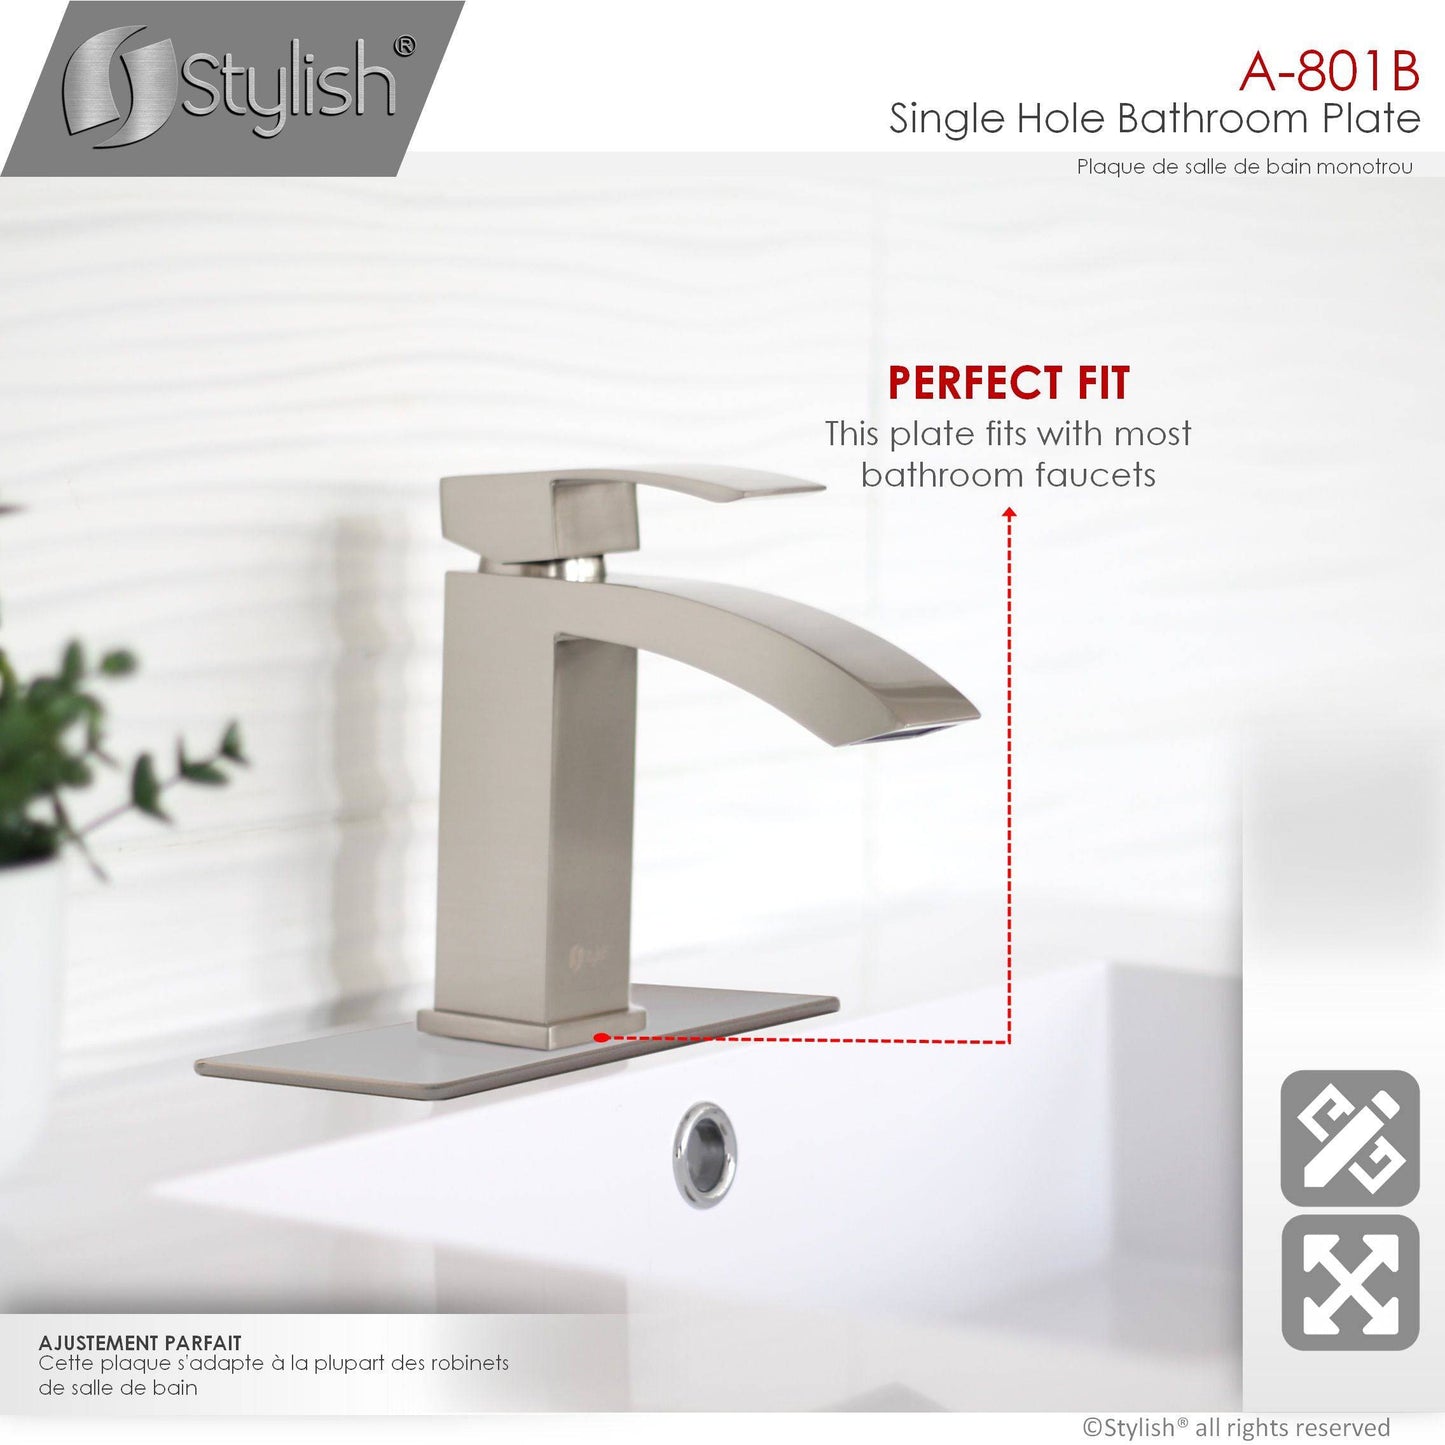 Stylish Single Hole Bathroom Faucet Plate in Brushed Nickel Finish A-801B